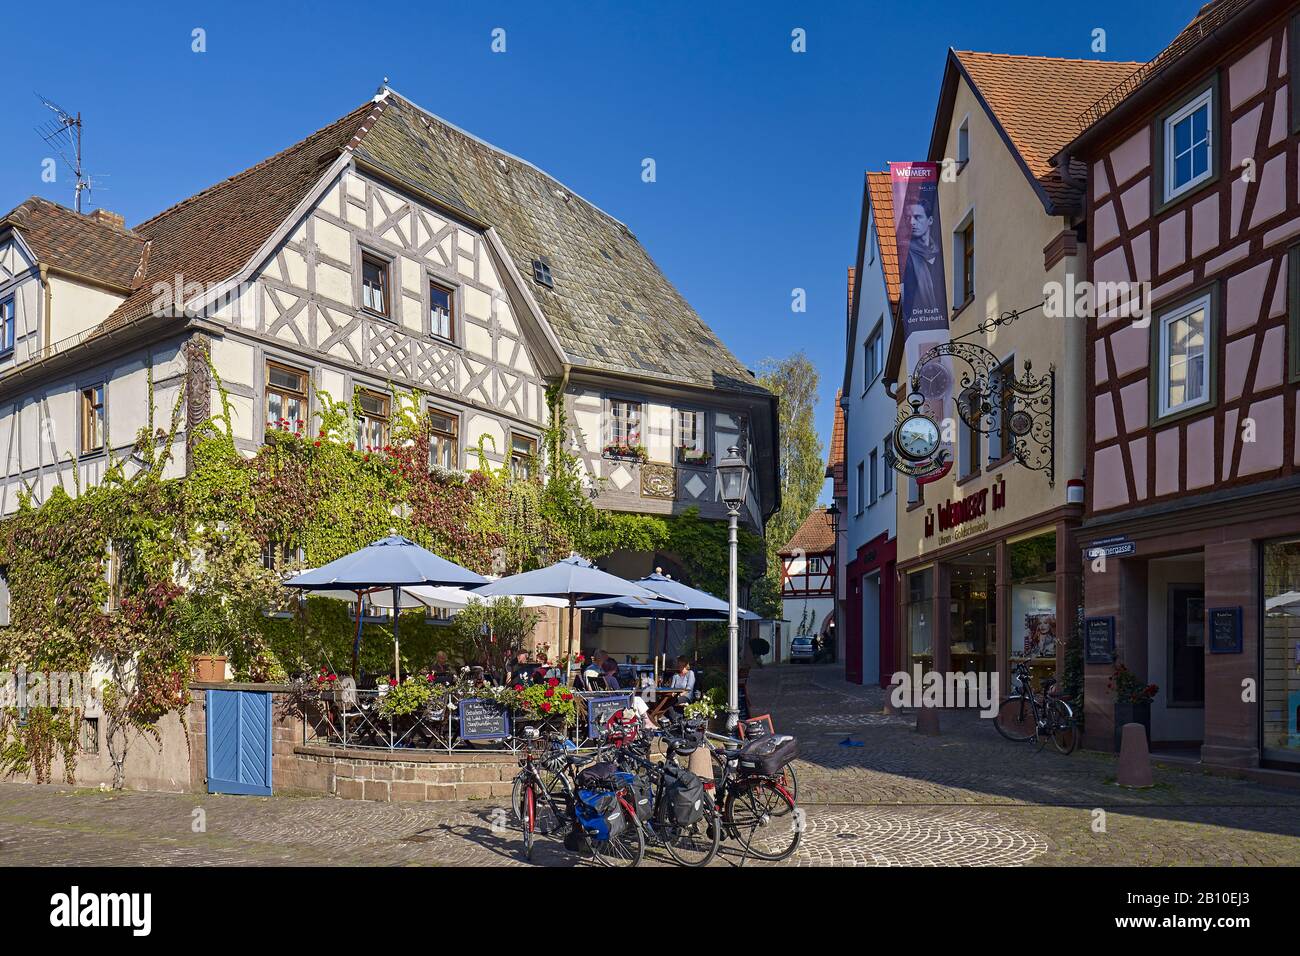 Gasthof Krone in the old town in Lohr am Main, Lower Franconia, Bavaria, Germany Stock Photo